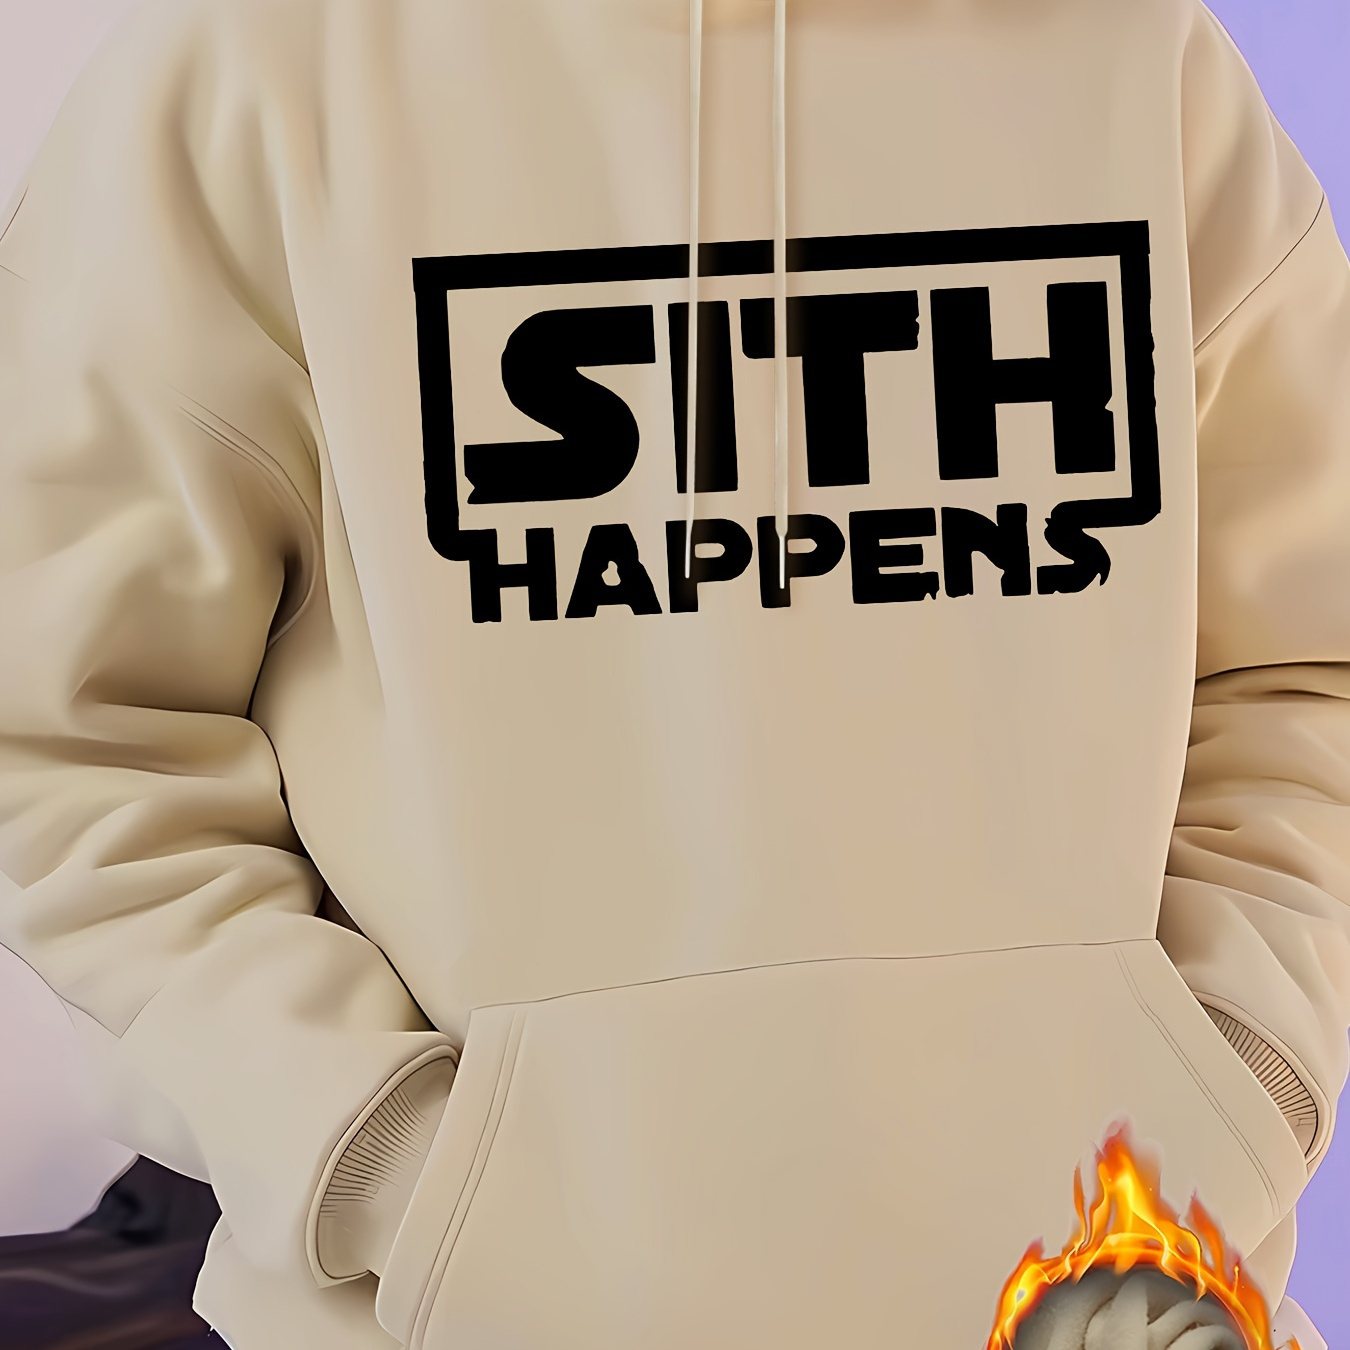 

Sith Happens Print Sweatshirt, Men's Fleece Long Sleeve Hoodies Street Casual Sports And Fashionable With Kangaroo Pocket, For Outdoor Sports, For Autumn Winter, Warm And Cozy